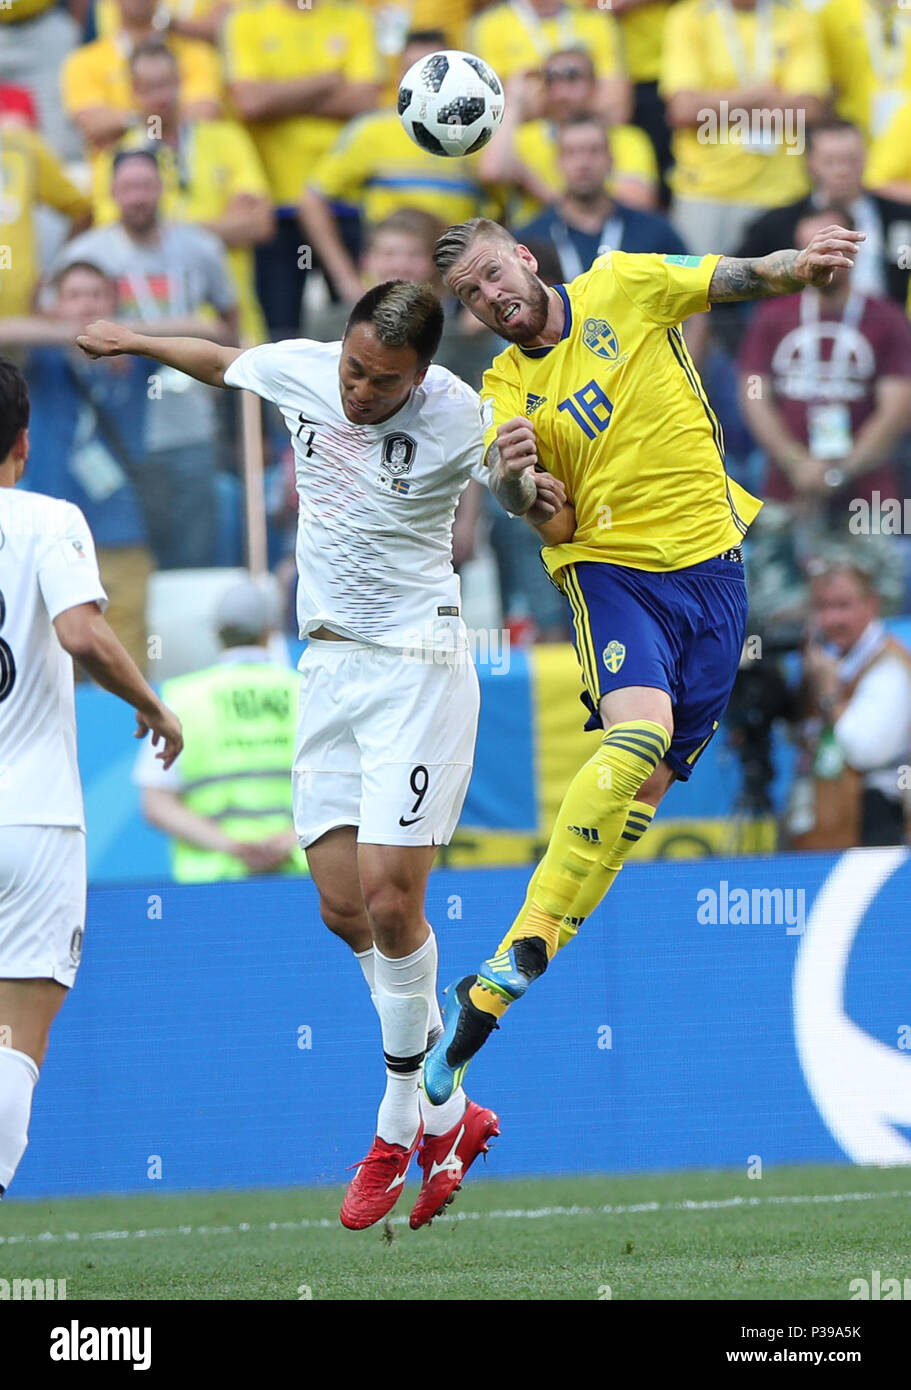 Nizhny Novgorod, Russia. 18th June, 2018. Pontus Jansson (R) of Sweden vies with Kim Shinwook of South Korea during a group F match between Sweden and South Korea at the 2018 FIFA World Cup in Nizhny Novgorod, Russia, June 18, 2018. Credit: Wu Zhuang/Xinhua/Alamy Live News Stock Photo